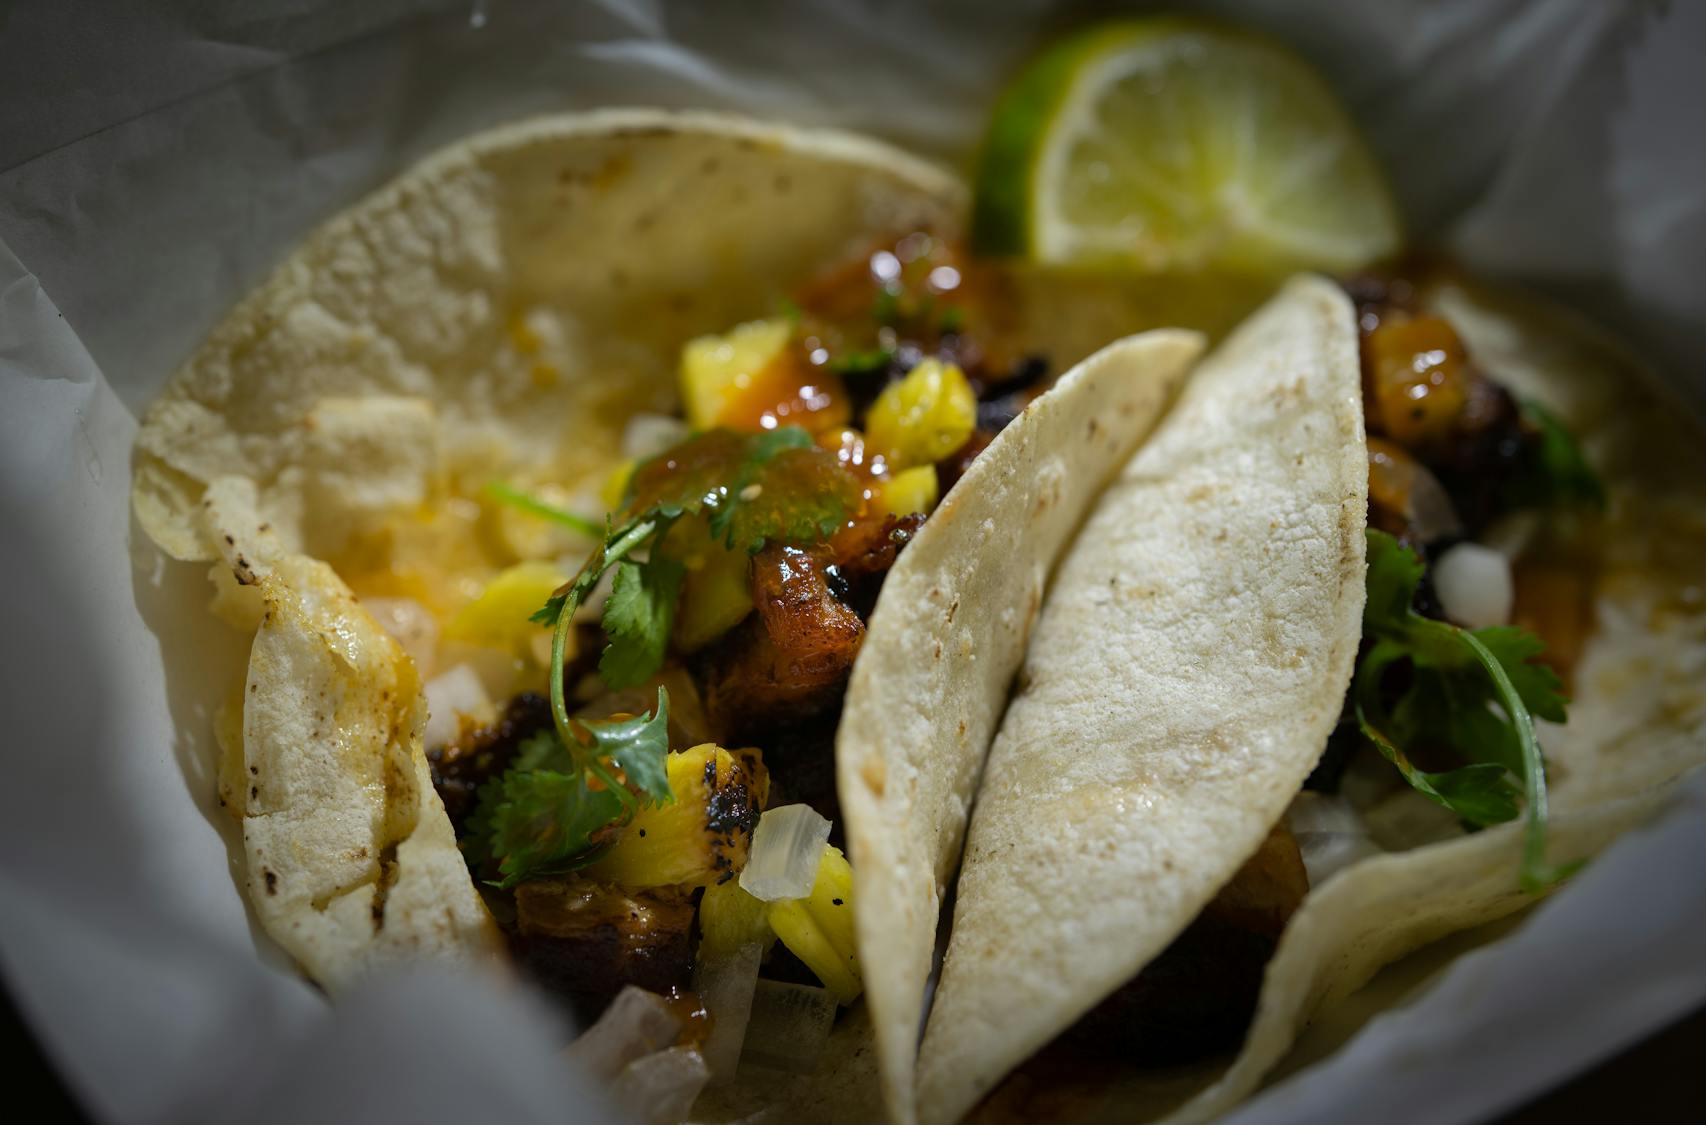 Chipotle Glazed Pork Belly Tacos al Pastor from Tajas Express. New foods at the Minnesota State Fair photographed on Thursday, Aug. 25, 2022 in Falcon Heights, Minn. ] RENEE JONES SCHNEIDER • renee.jones@startribune.com